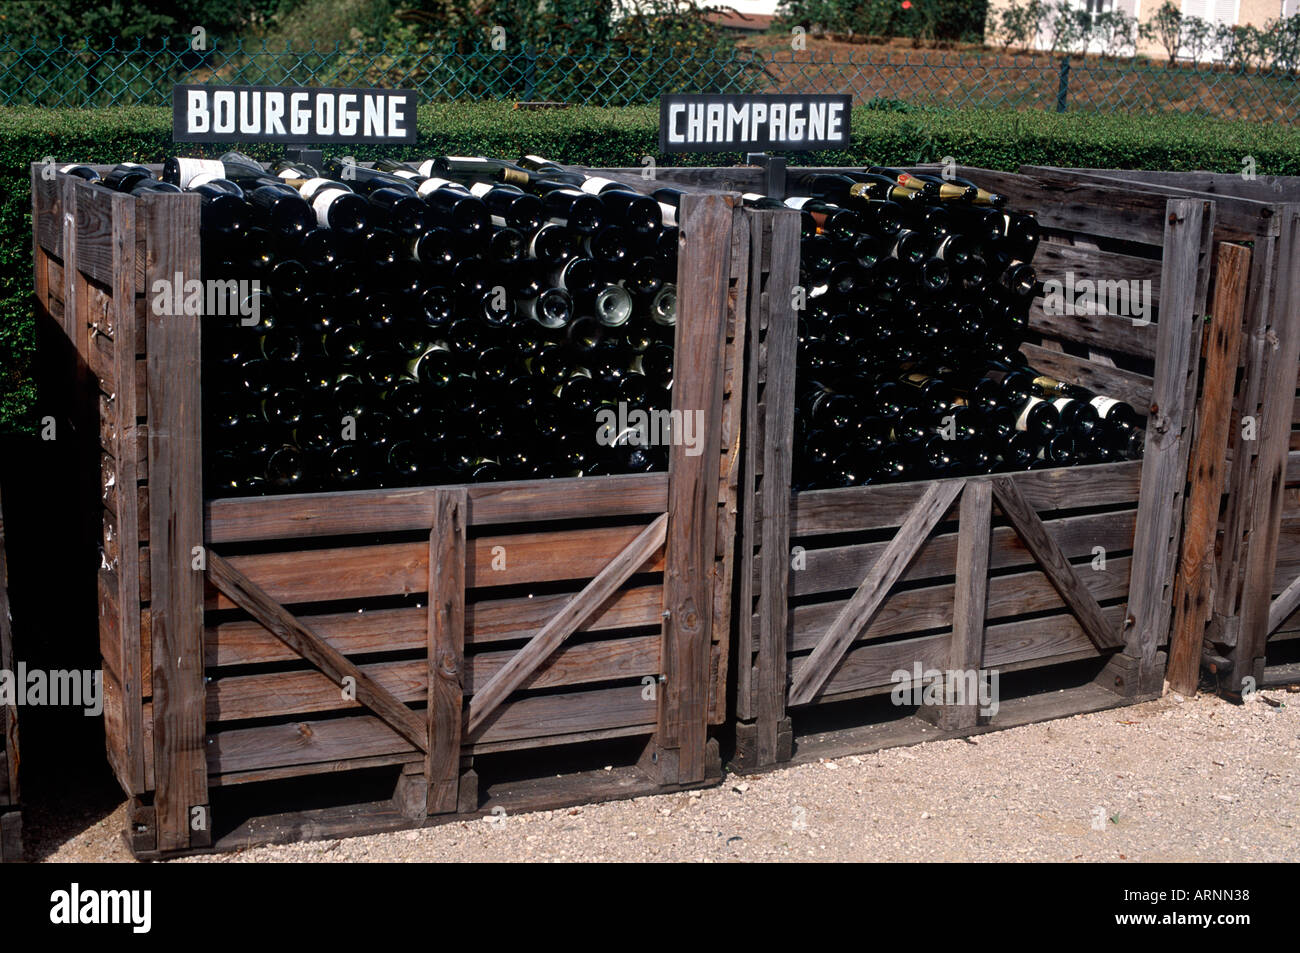 Public wine bottle recycling with separate bins for Burgundy and Champagne bottles, Pernand Vergelesses, Cote de Beaune, France Stock Photo